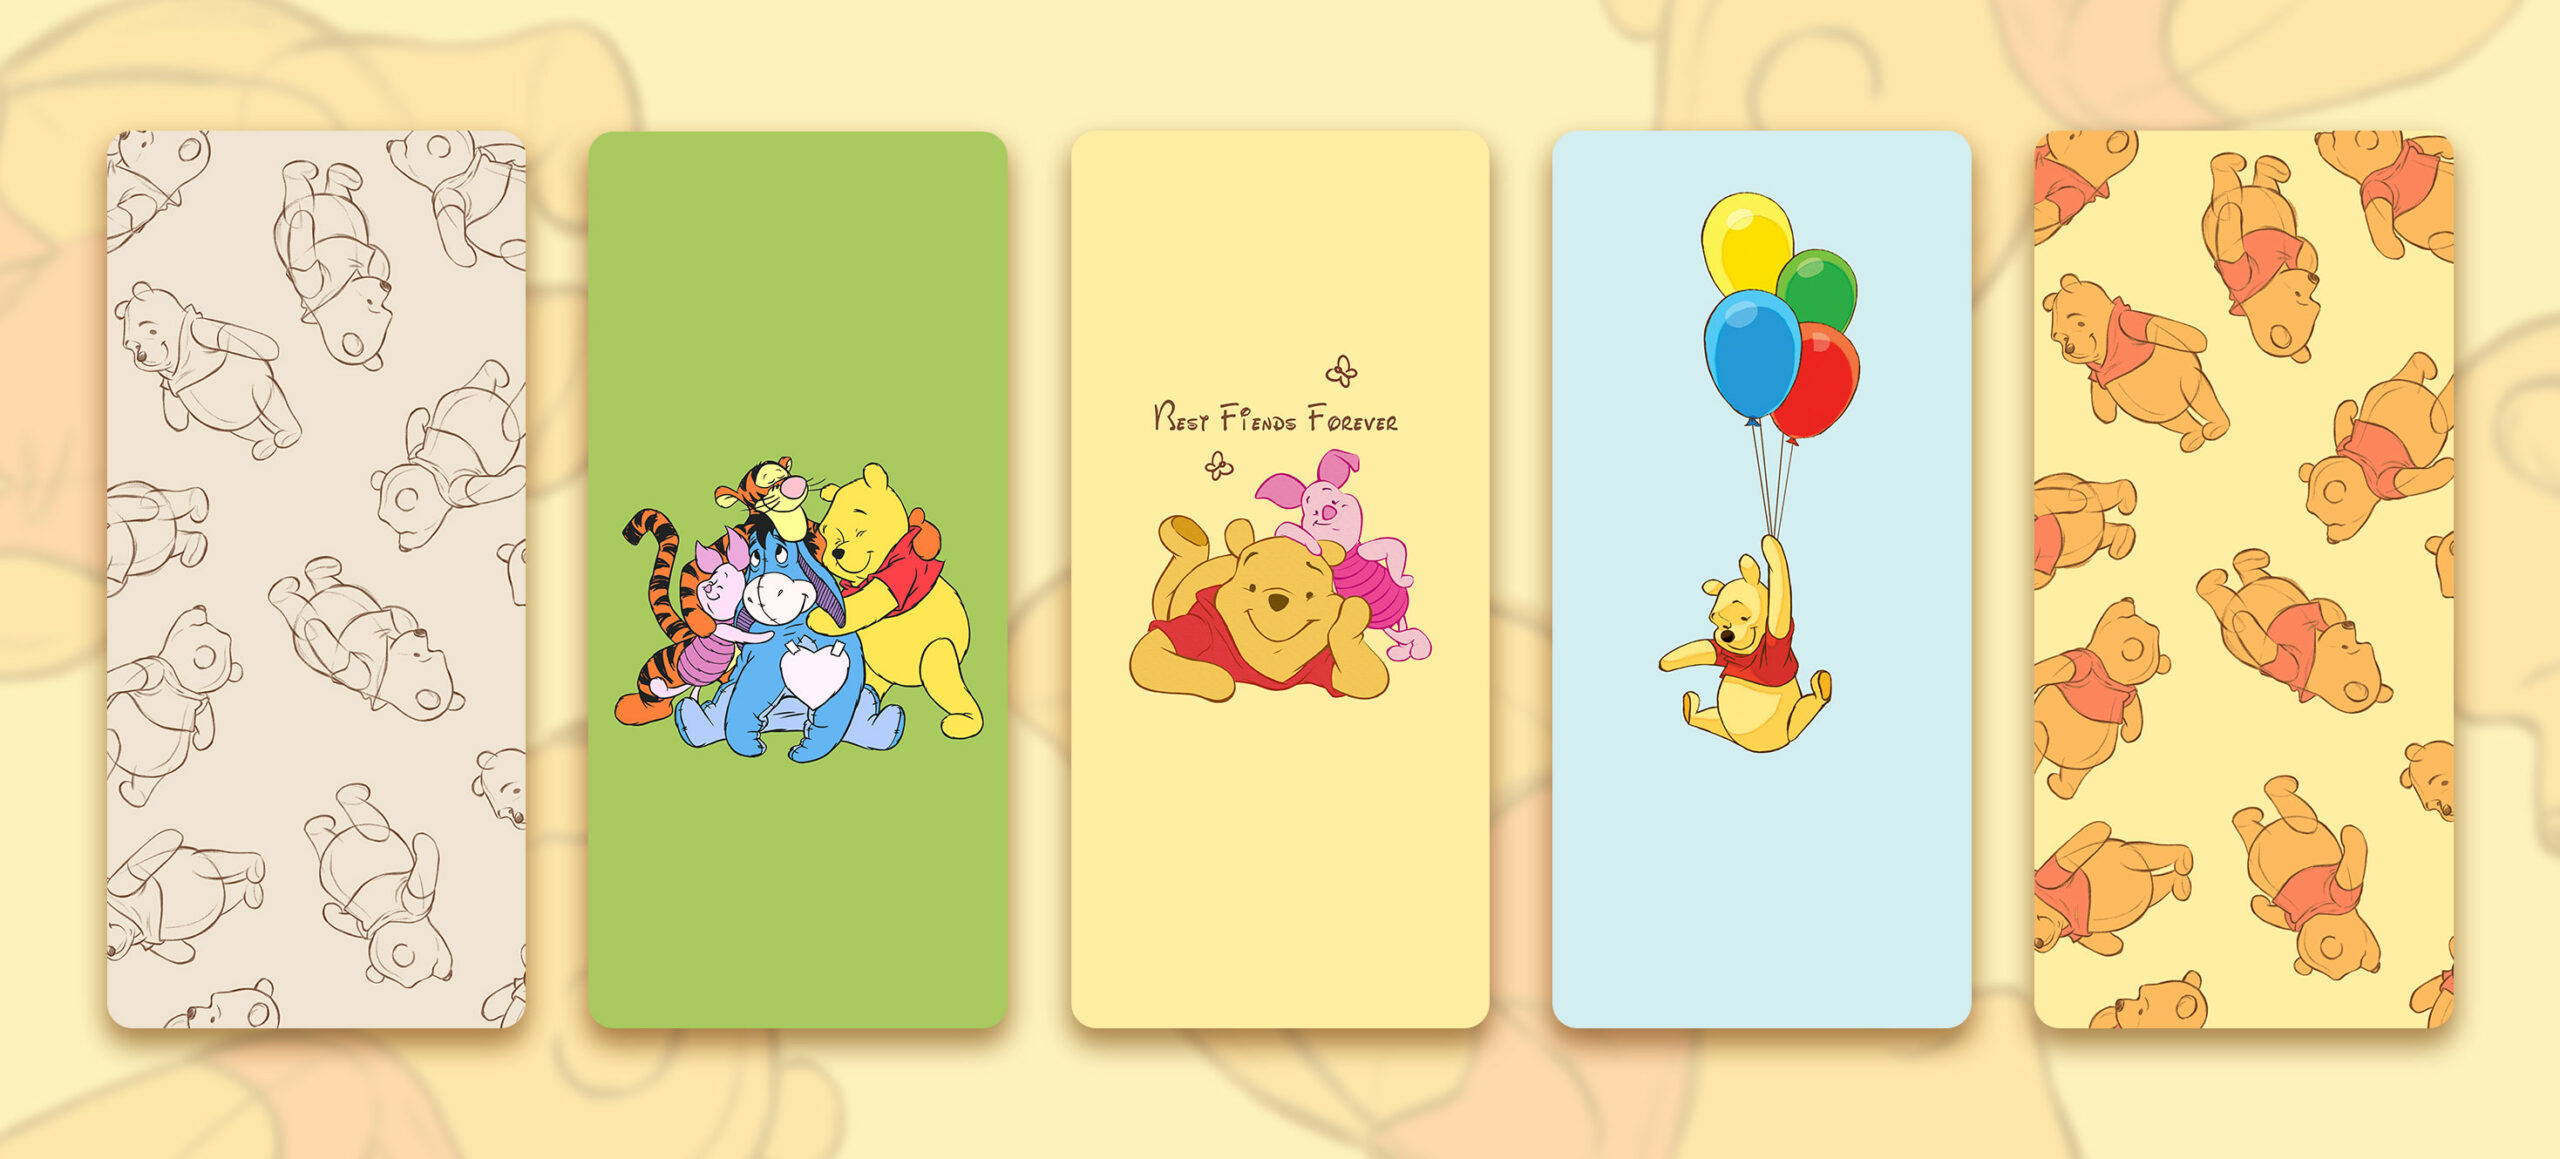 winnie the pooh wallpapers pack preview 6